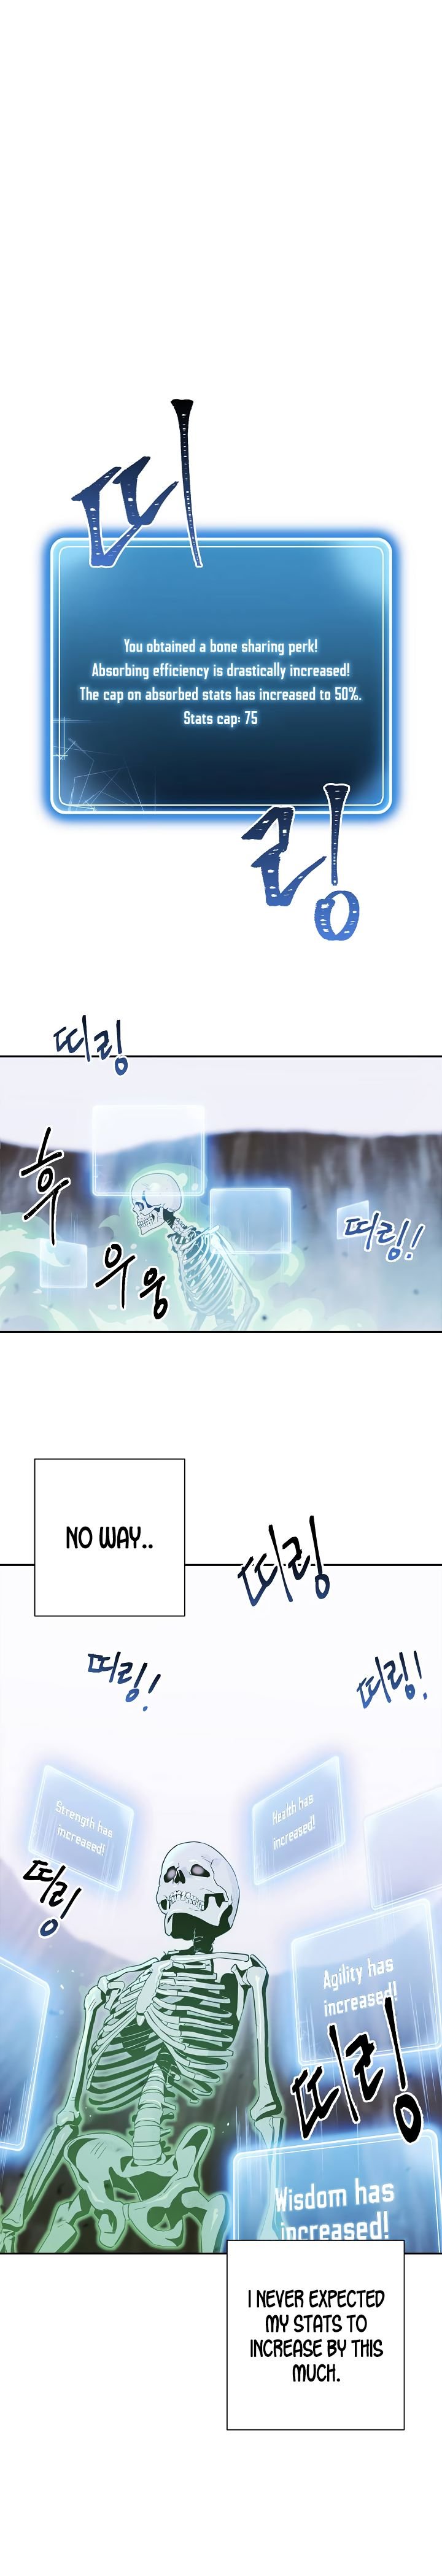 The Skeleton Soldier Failed to Defend the Dungeon [Official] chapter 57